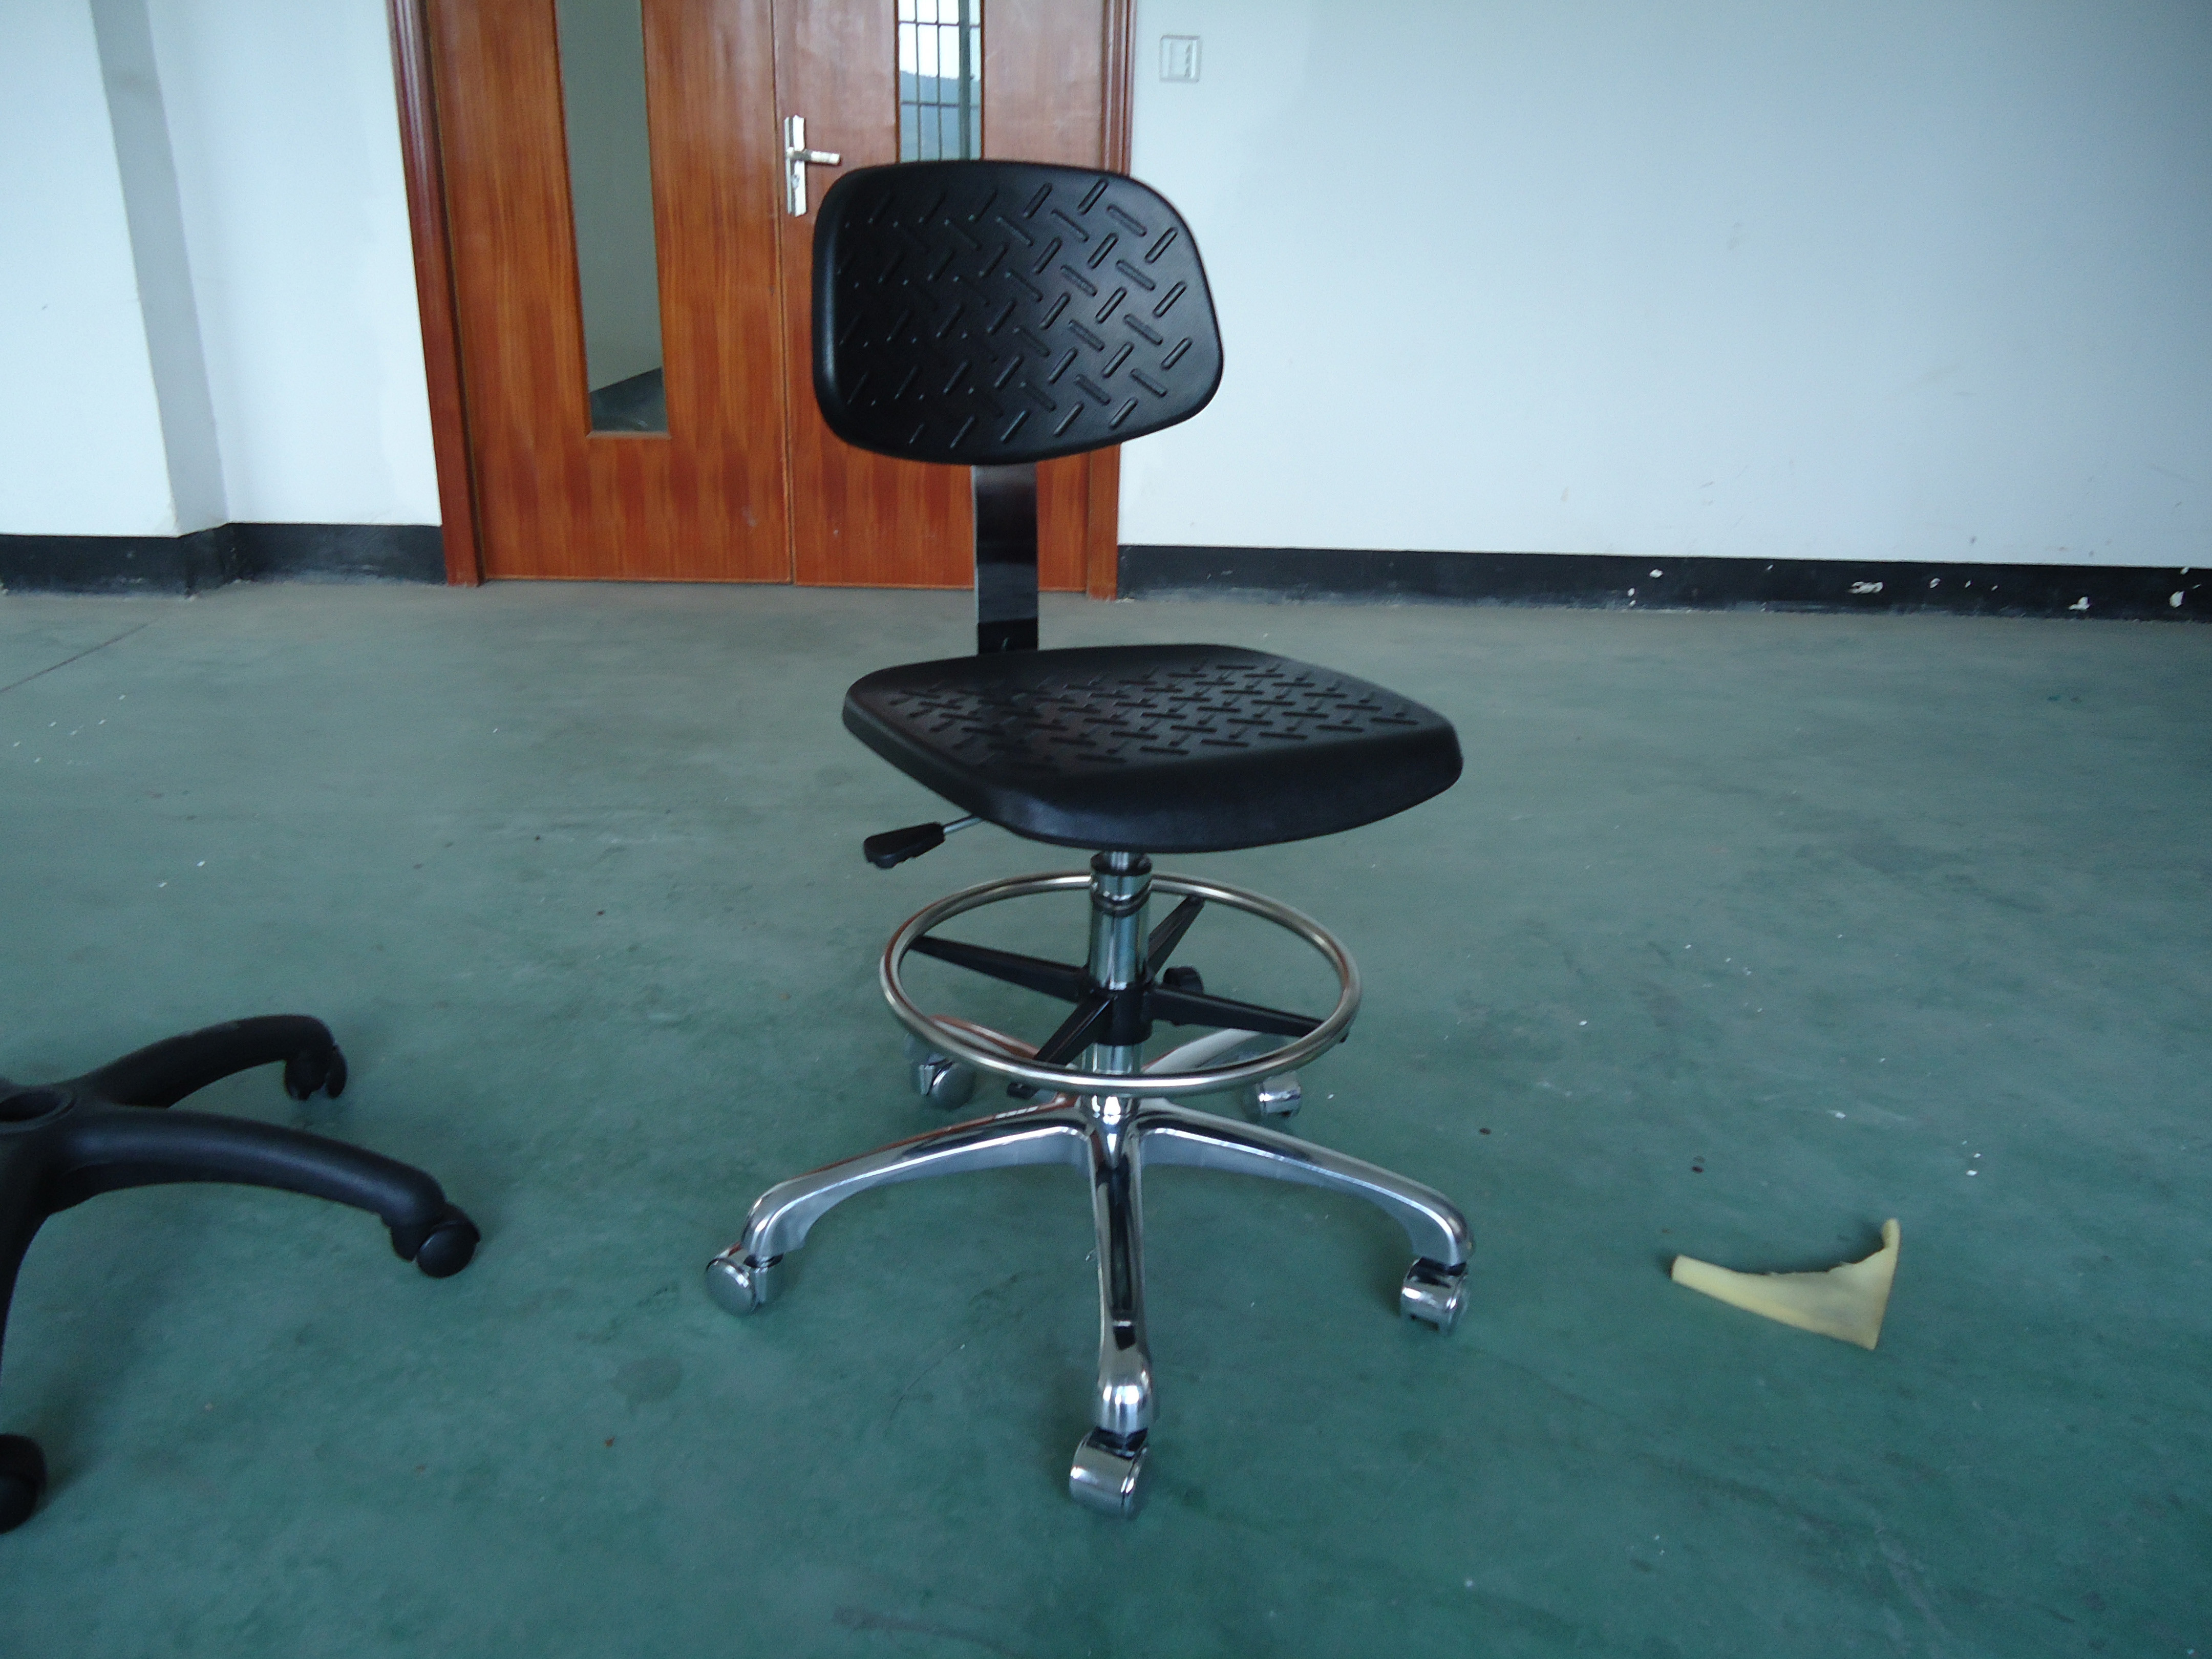 360 Degree Swivel ESD Office Chair , 630 * 830mm Height Adjustable Lab Chair